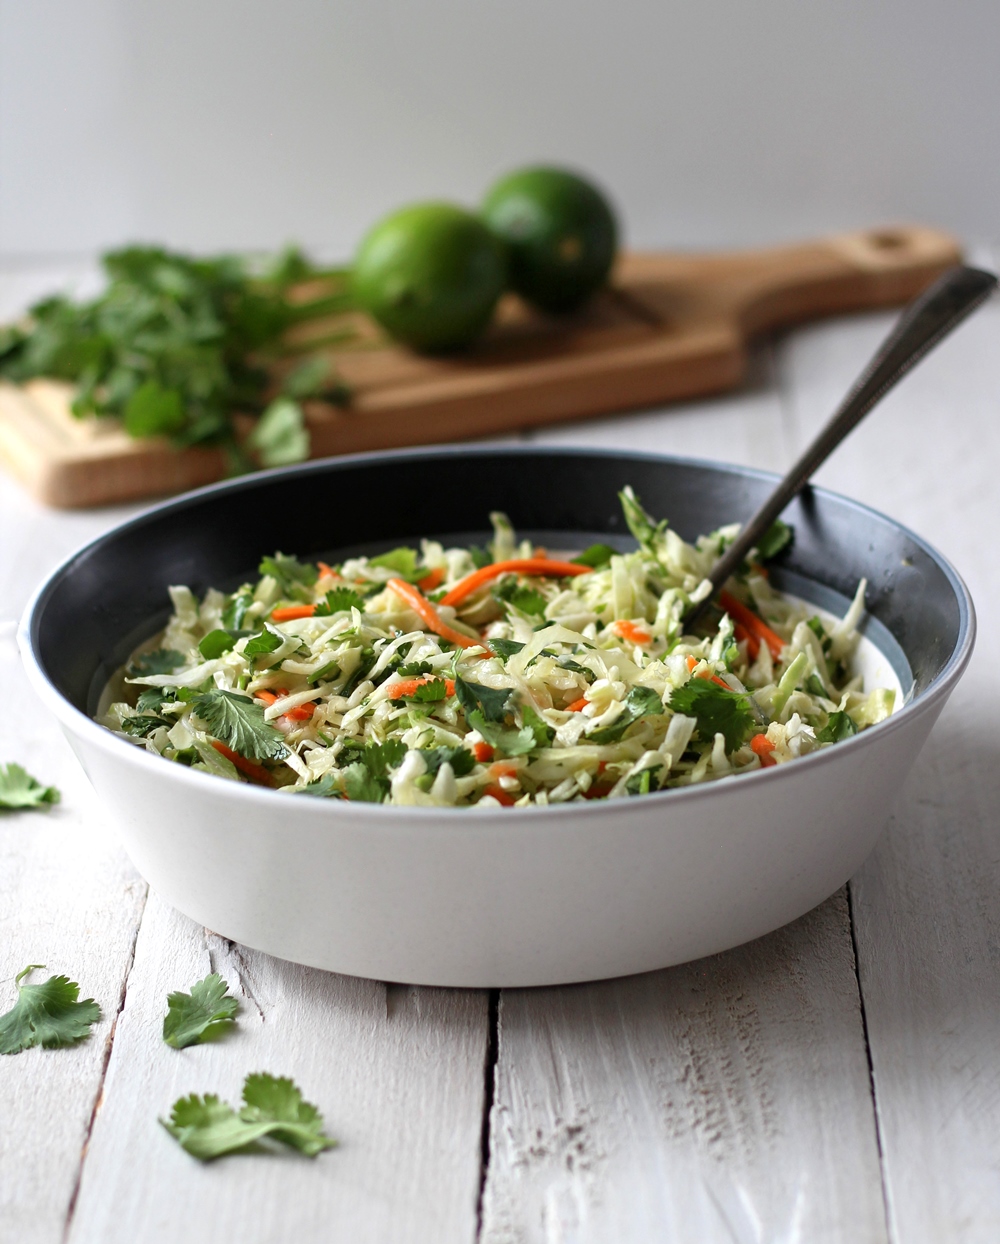 Coleslaw in a white bowl with cilantro and limes in the background